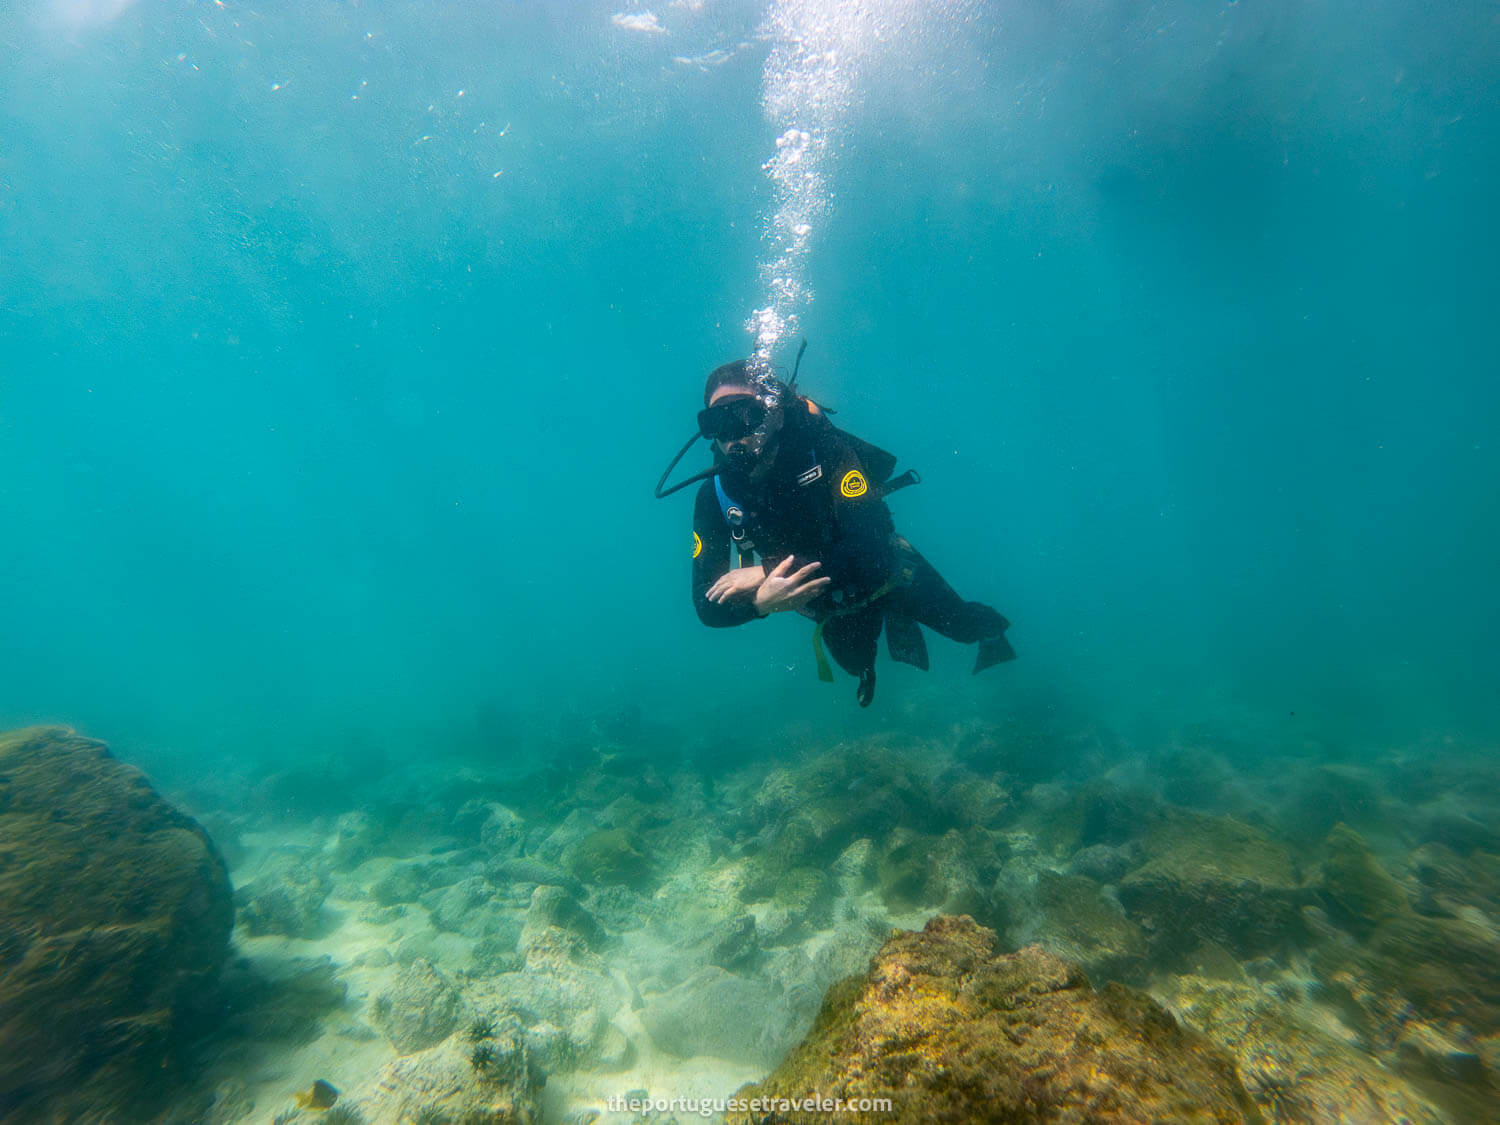 The discovery dive in Isla Lobos